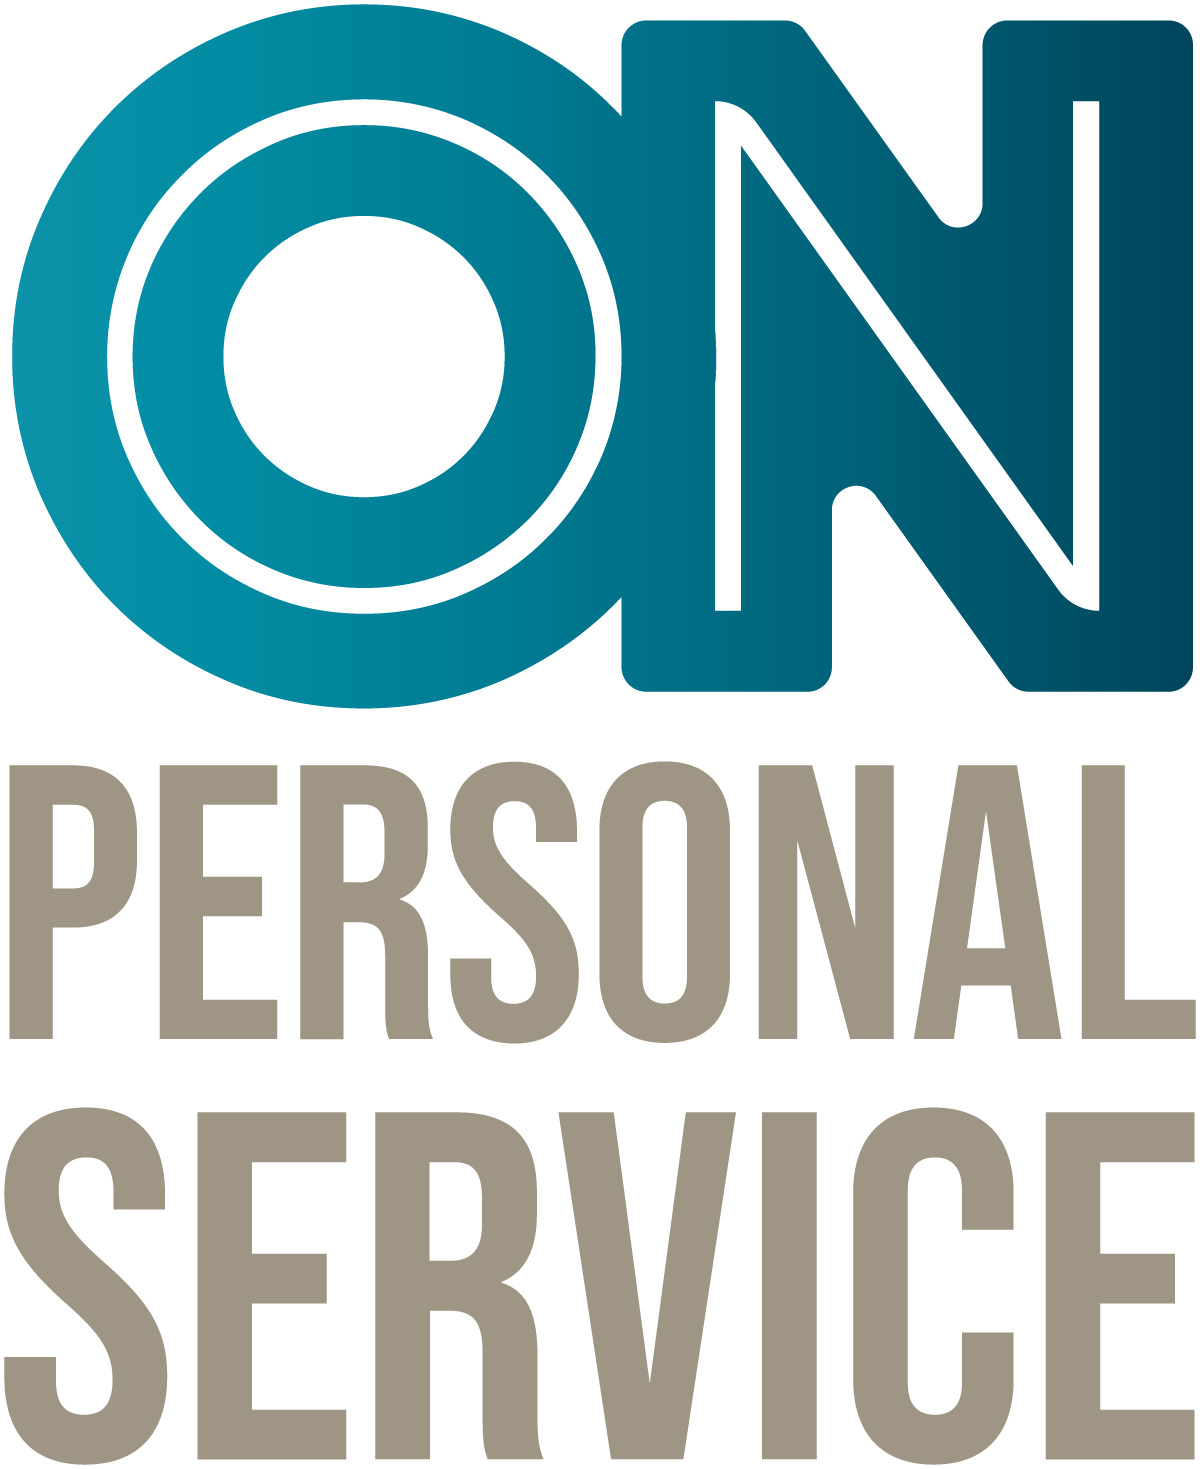 ON-Personalservice